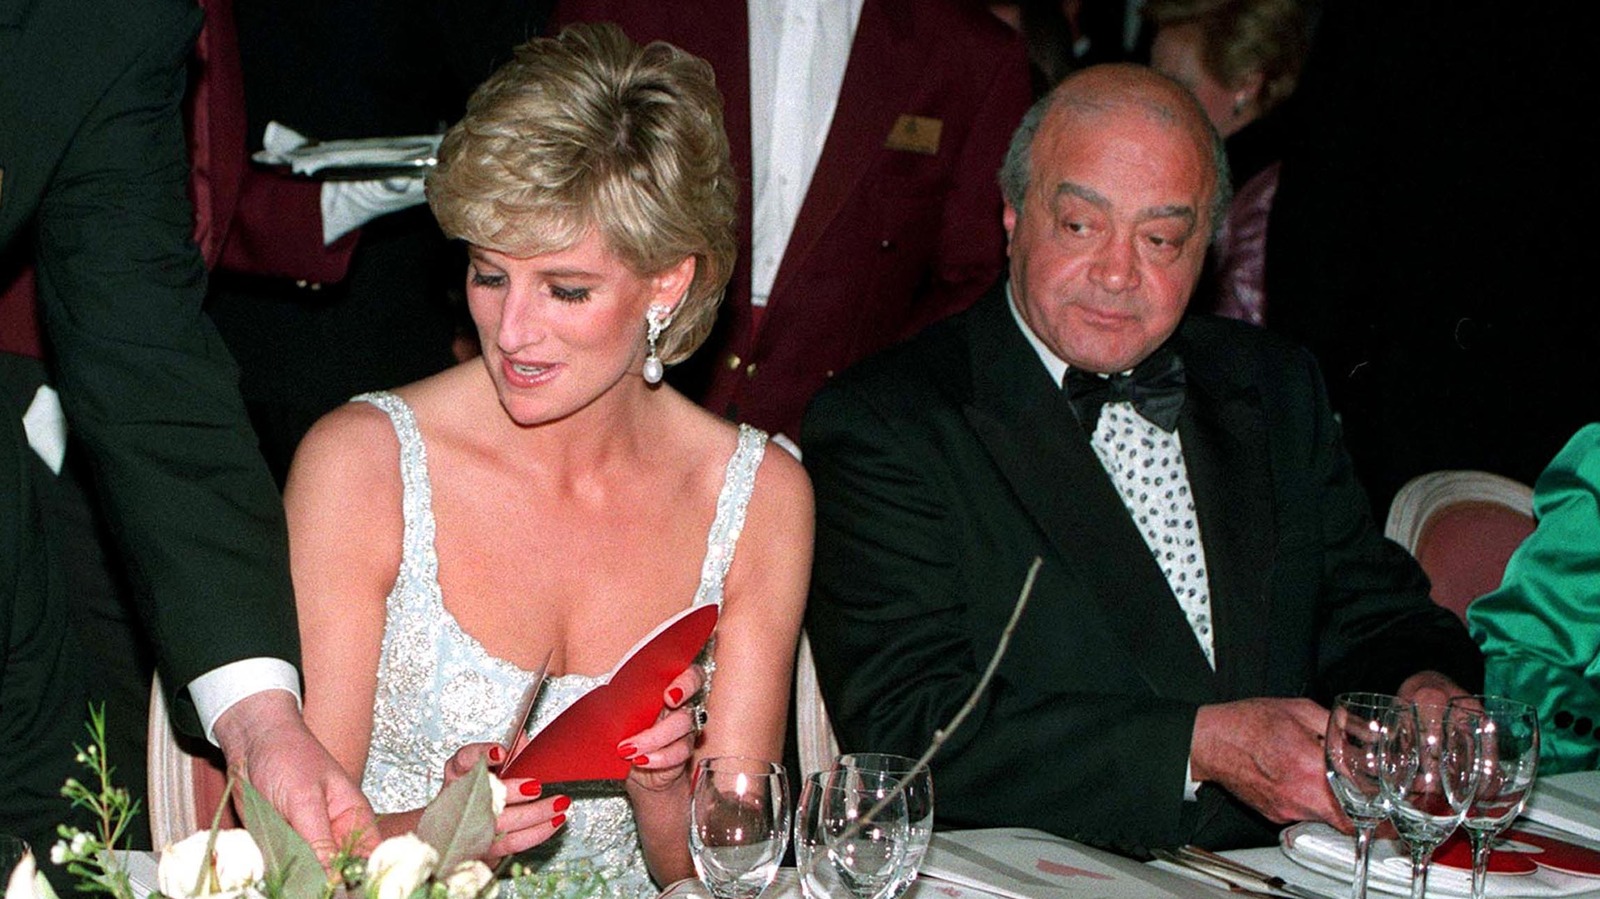 Inside Mohamed Al-Fayed's Relationship With Princess Diana